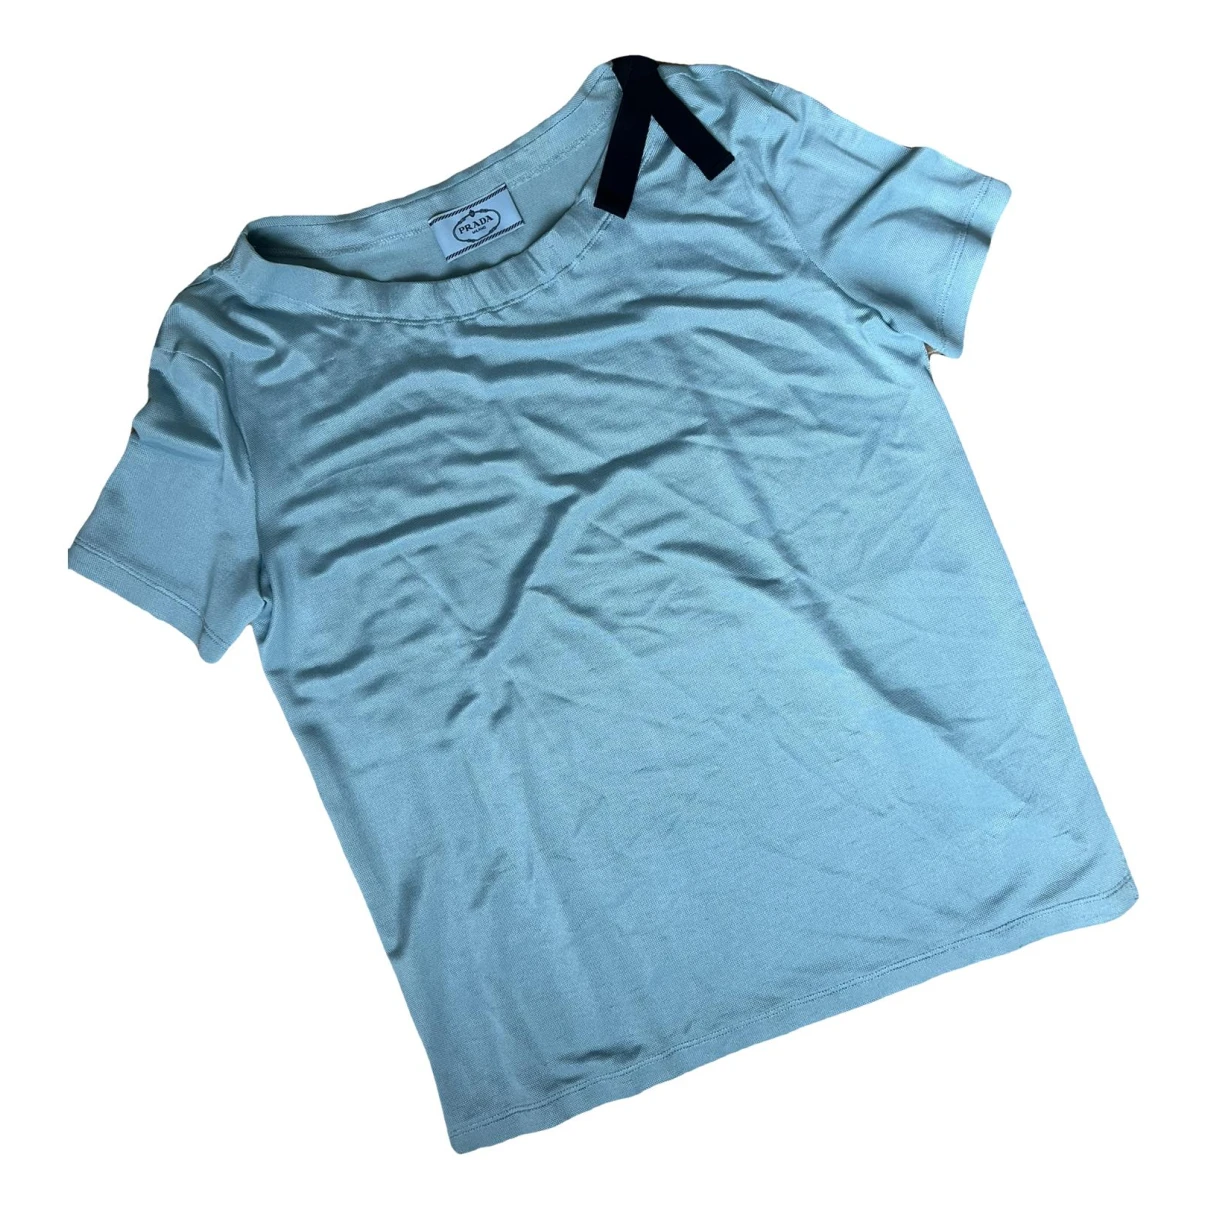 Pre-owned Prada T-shirt In Turquoise